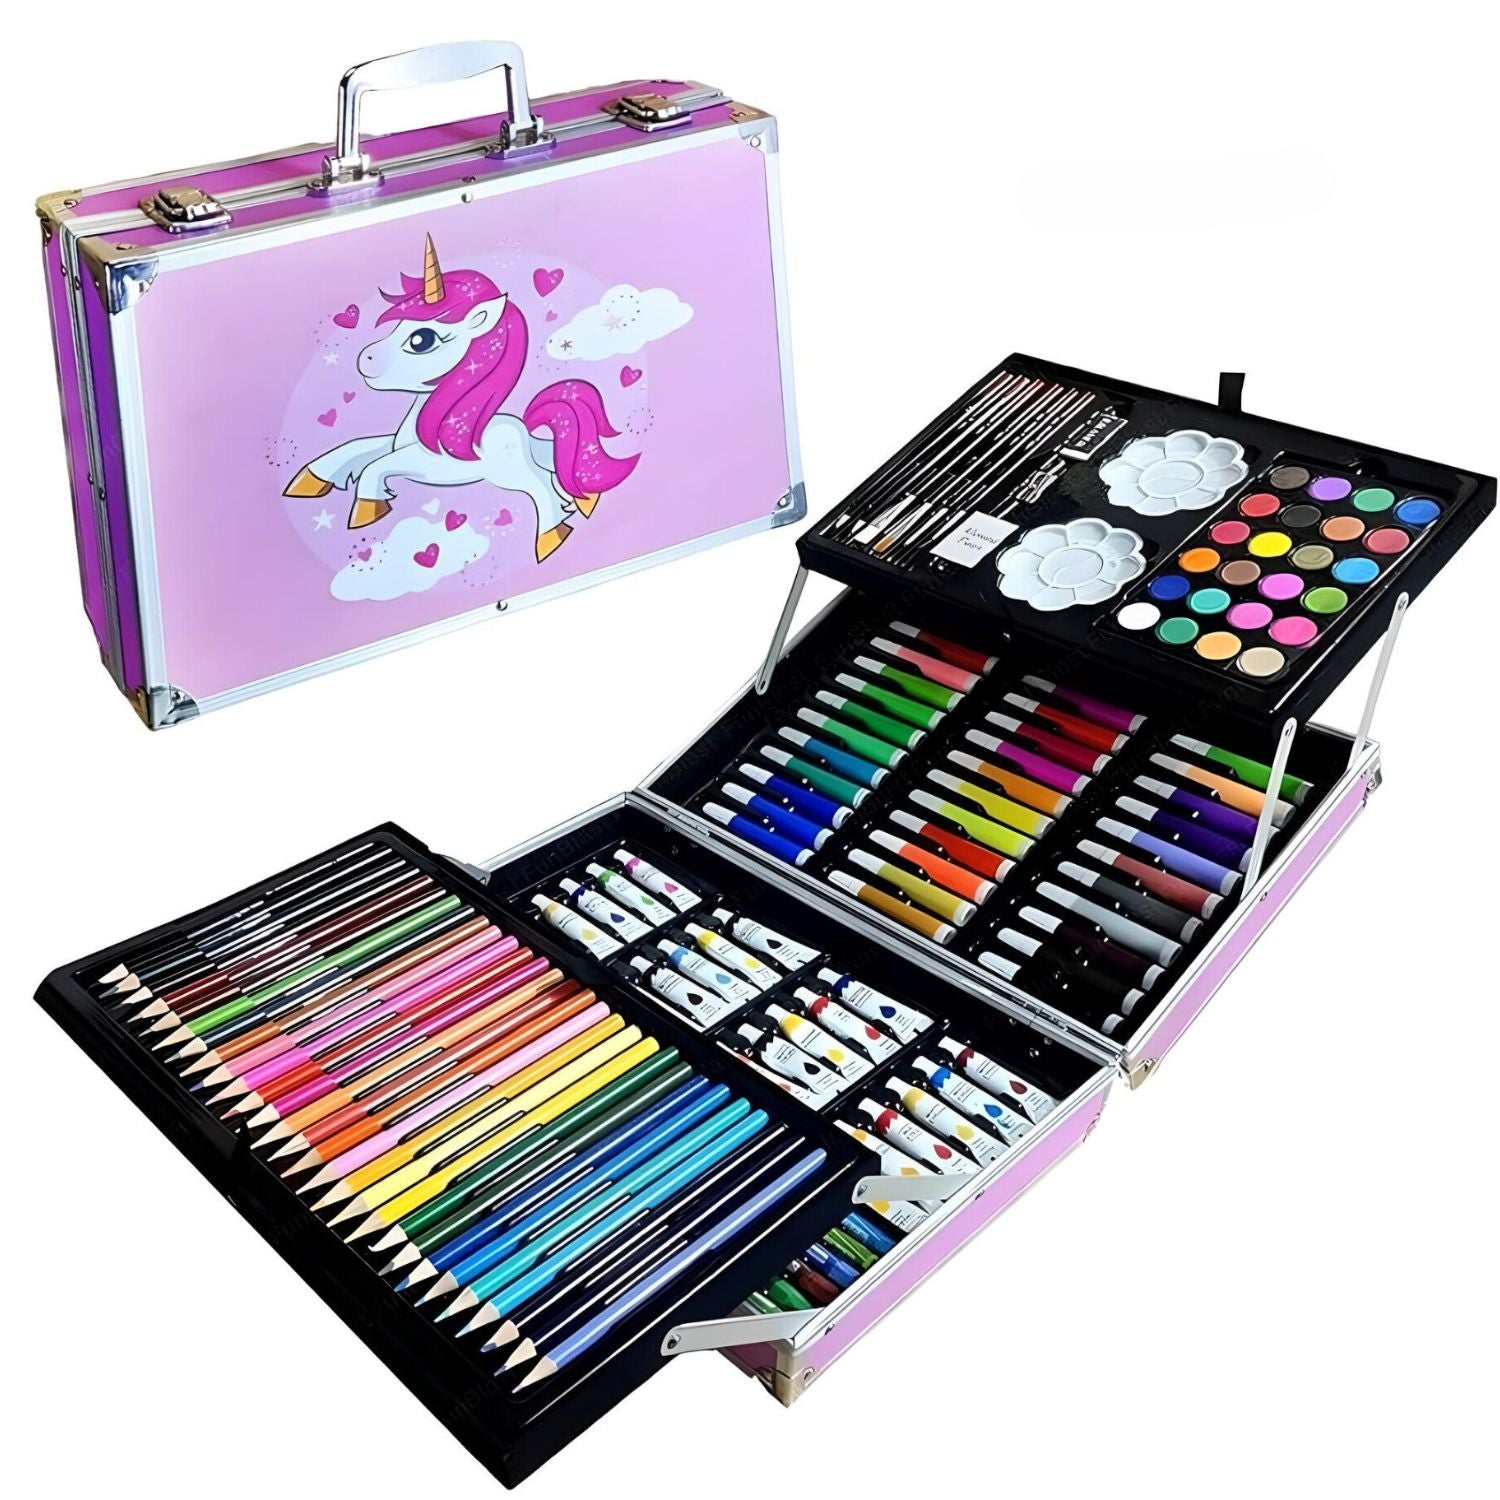 H&B 145pcs Innovative drawing arts and crafts sets creativity for kids how  to draw for kids, Drawing & Sketching Supplies